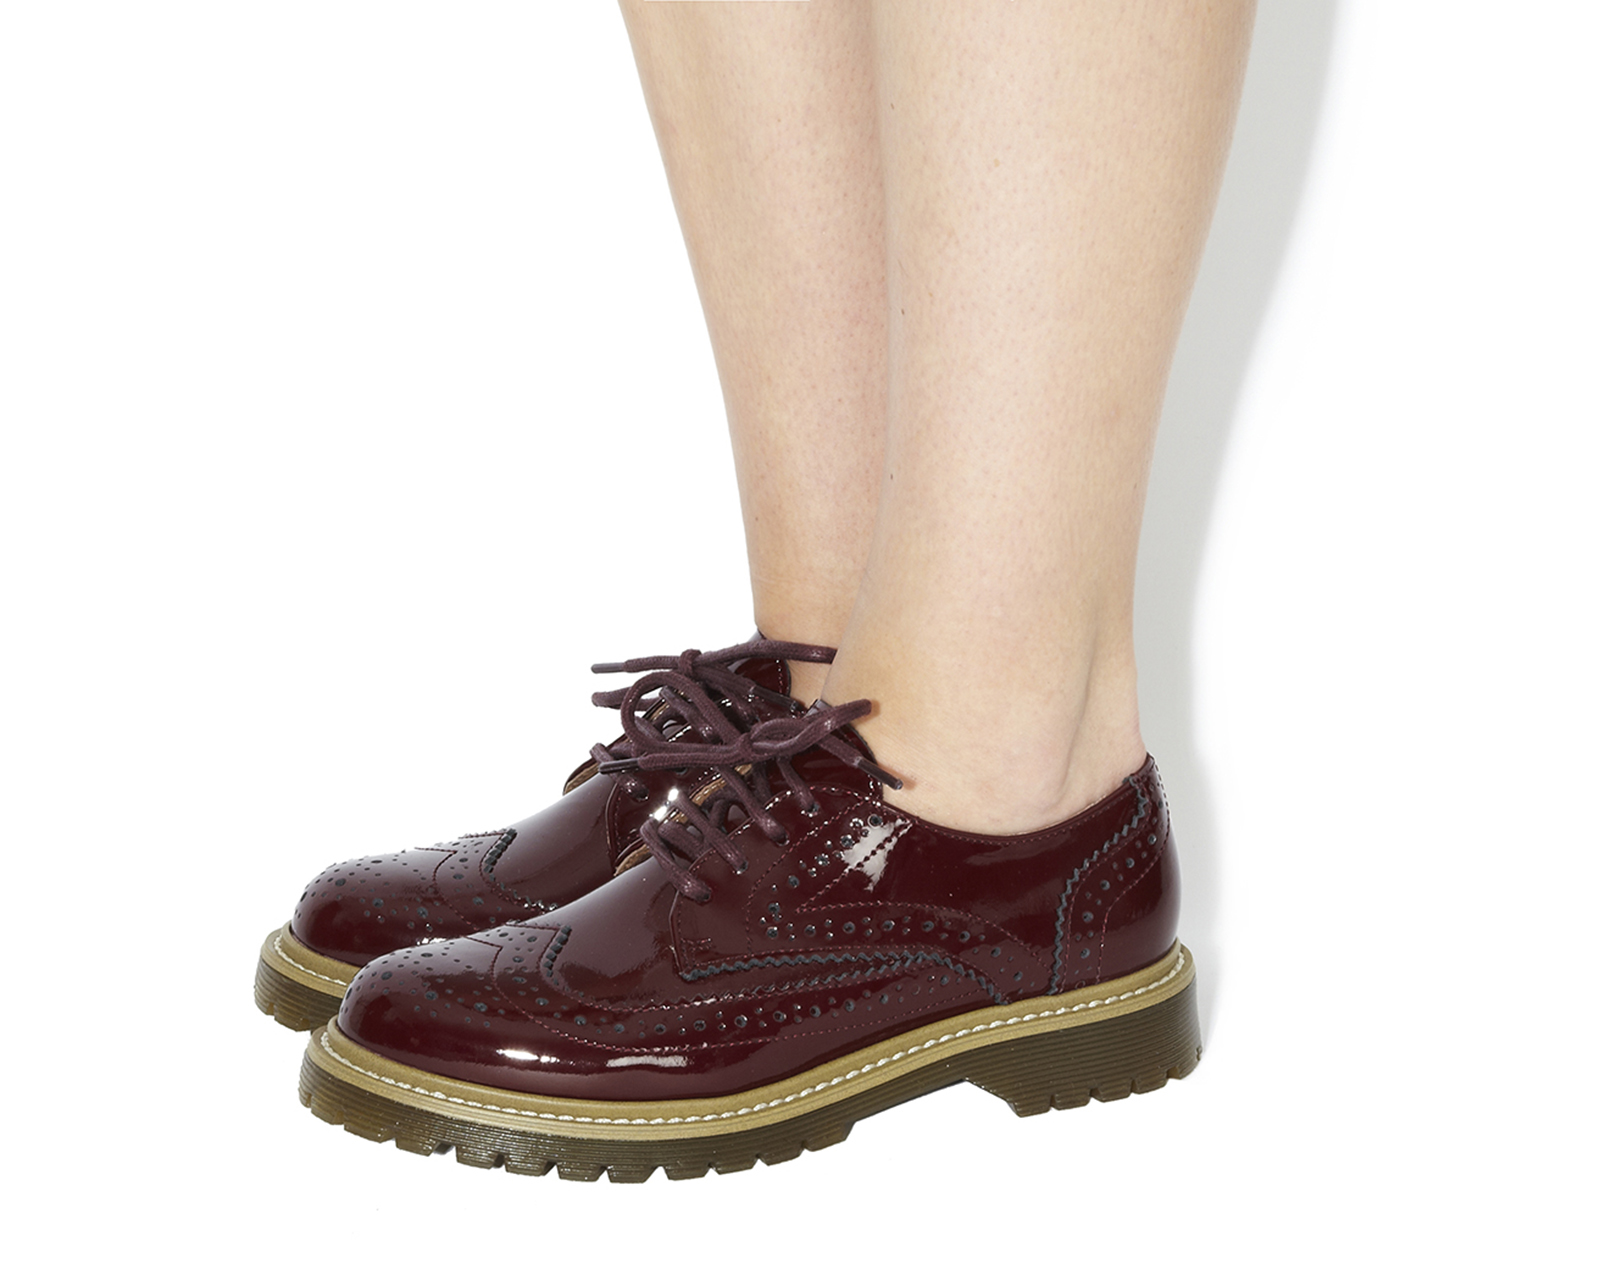 OFFICERush Hour Lace Up BroguesBurgundy Patent Leather